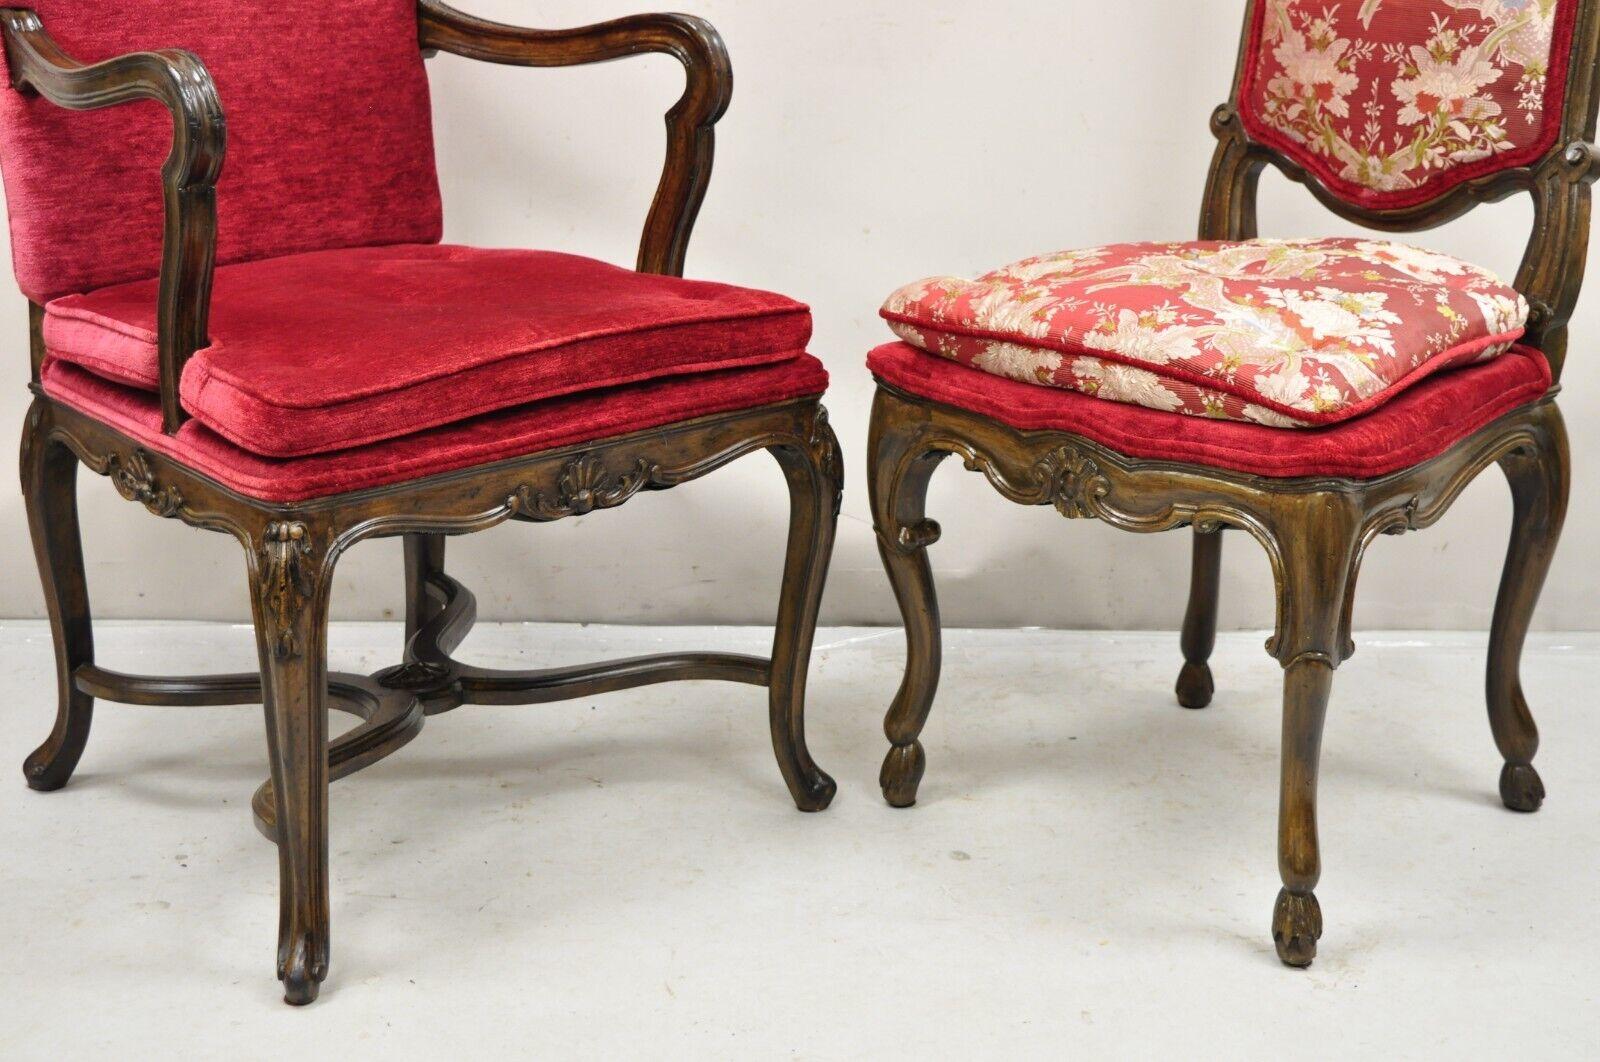 Vintage Italian Country Provincial Carved Walnut Red Dining Chairs - Set of 6 For Sale 1